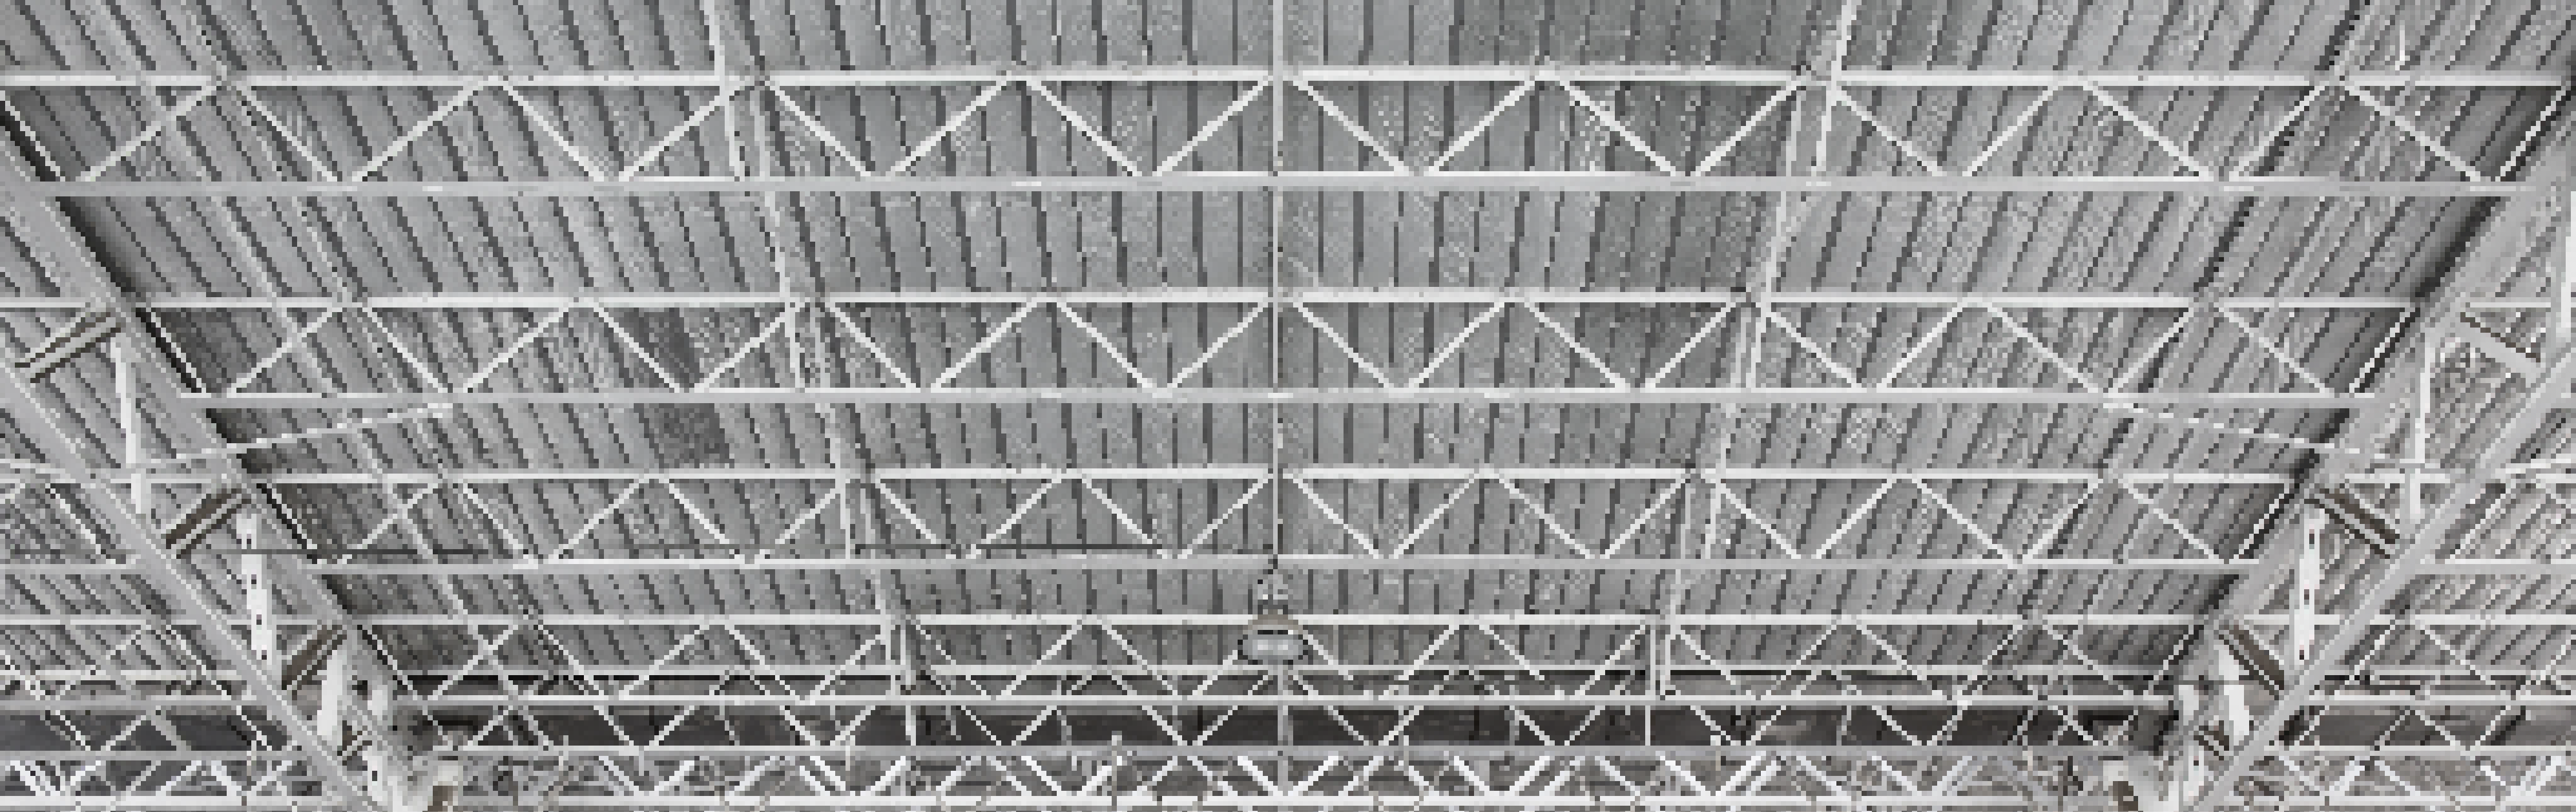 warehouse ceiling image